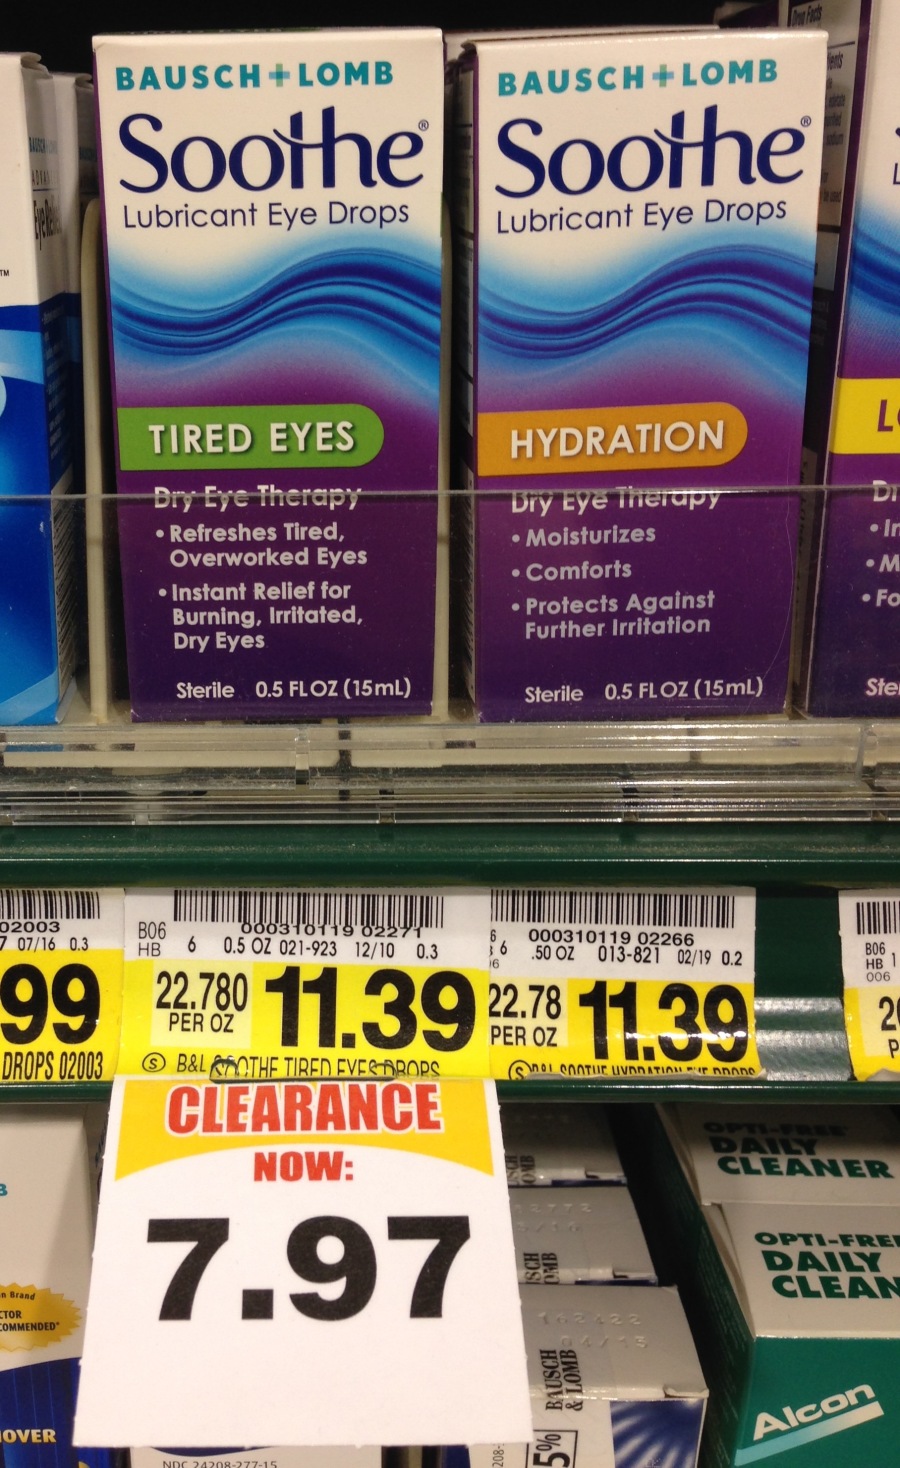 Bausch + Lomb Soothe Eye Drops only 4.97 at Harris Teeter The Coupon